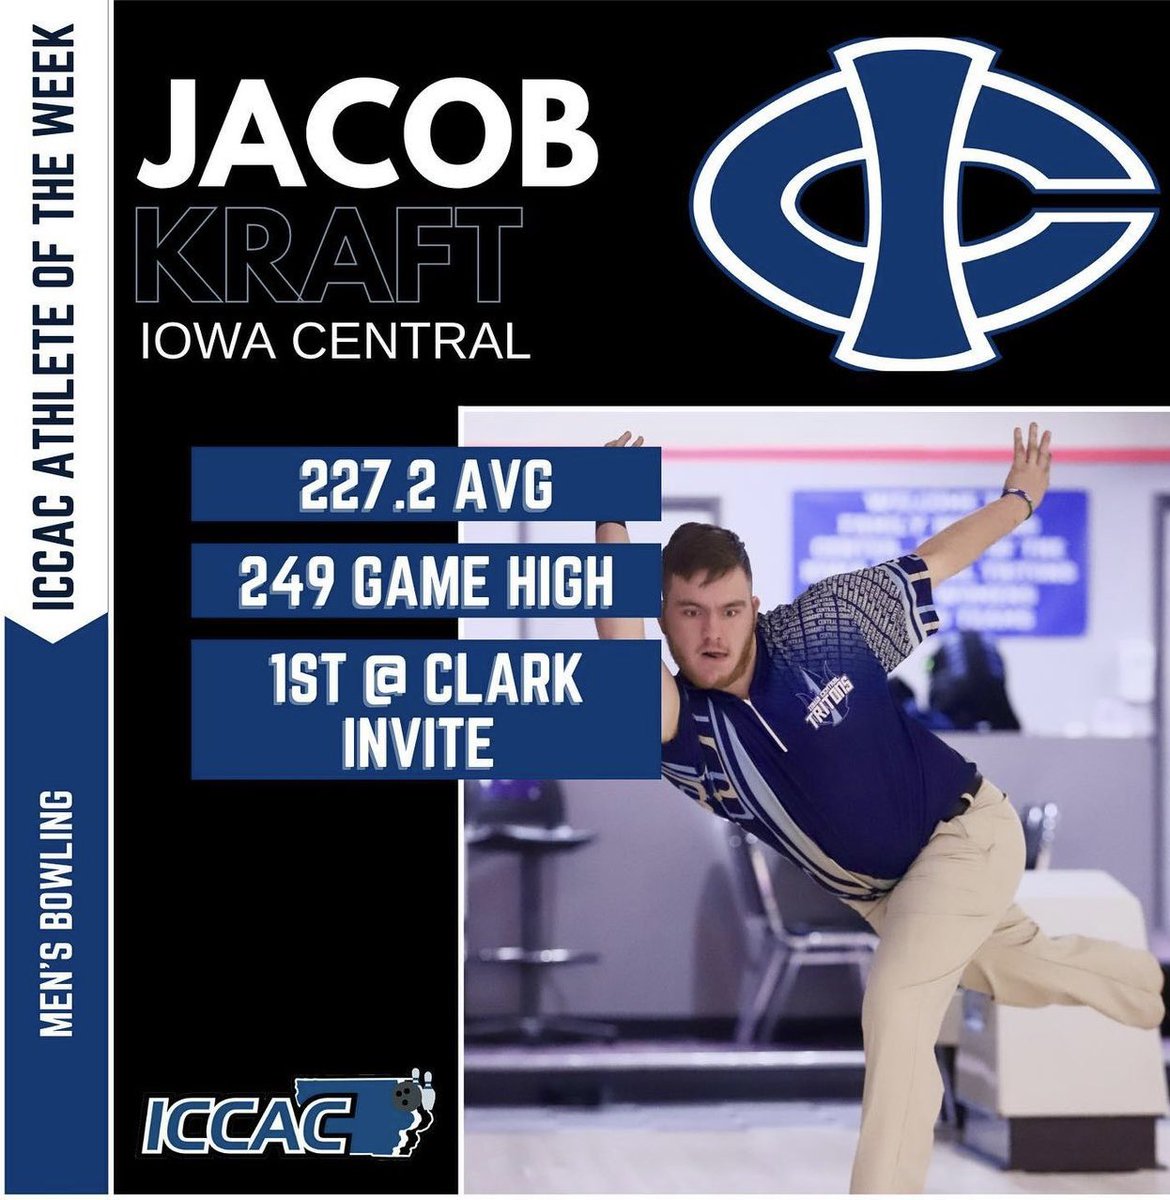 Shout out to the ICCAC Men’s Bowling Athlete of the Week, Jacob Kraft! Congrats, Jacob! #TritonPride 🔱